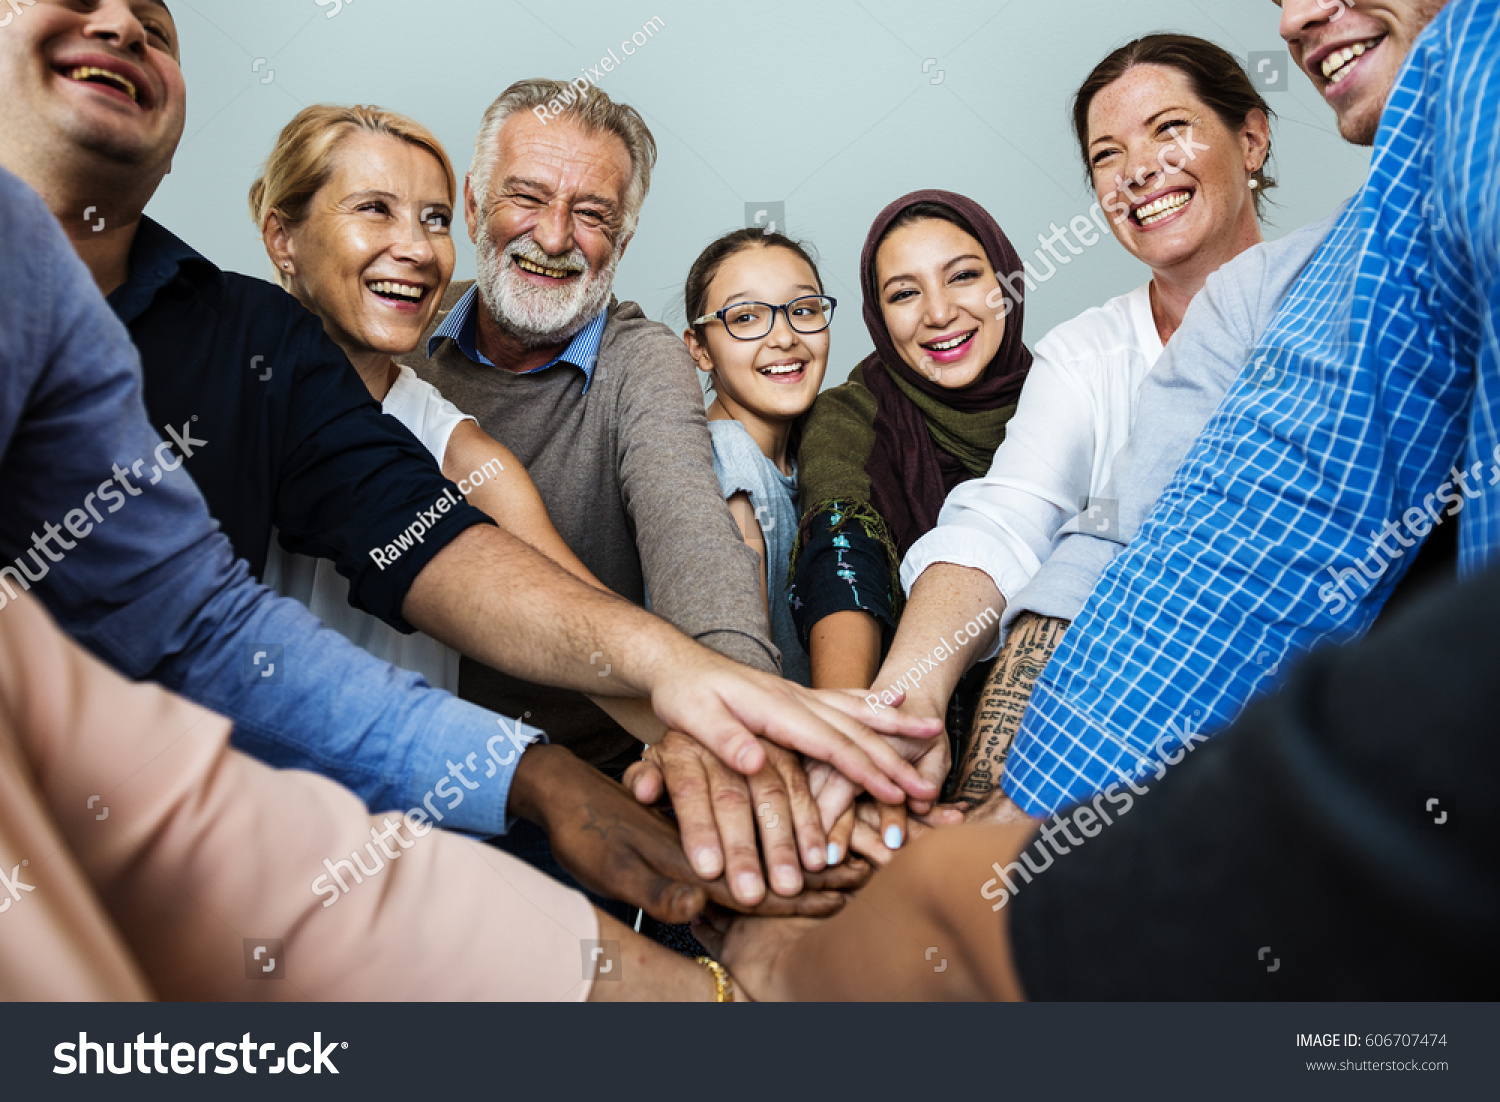 Group of Diverse People Hands Together Teamwork Cooperation #606707474